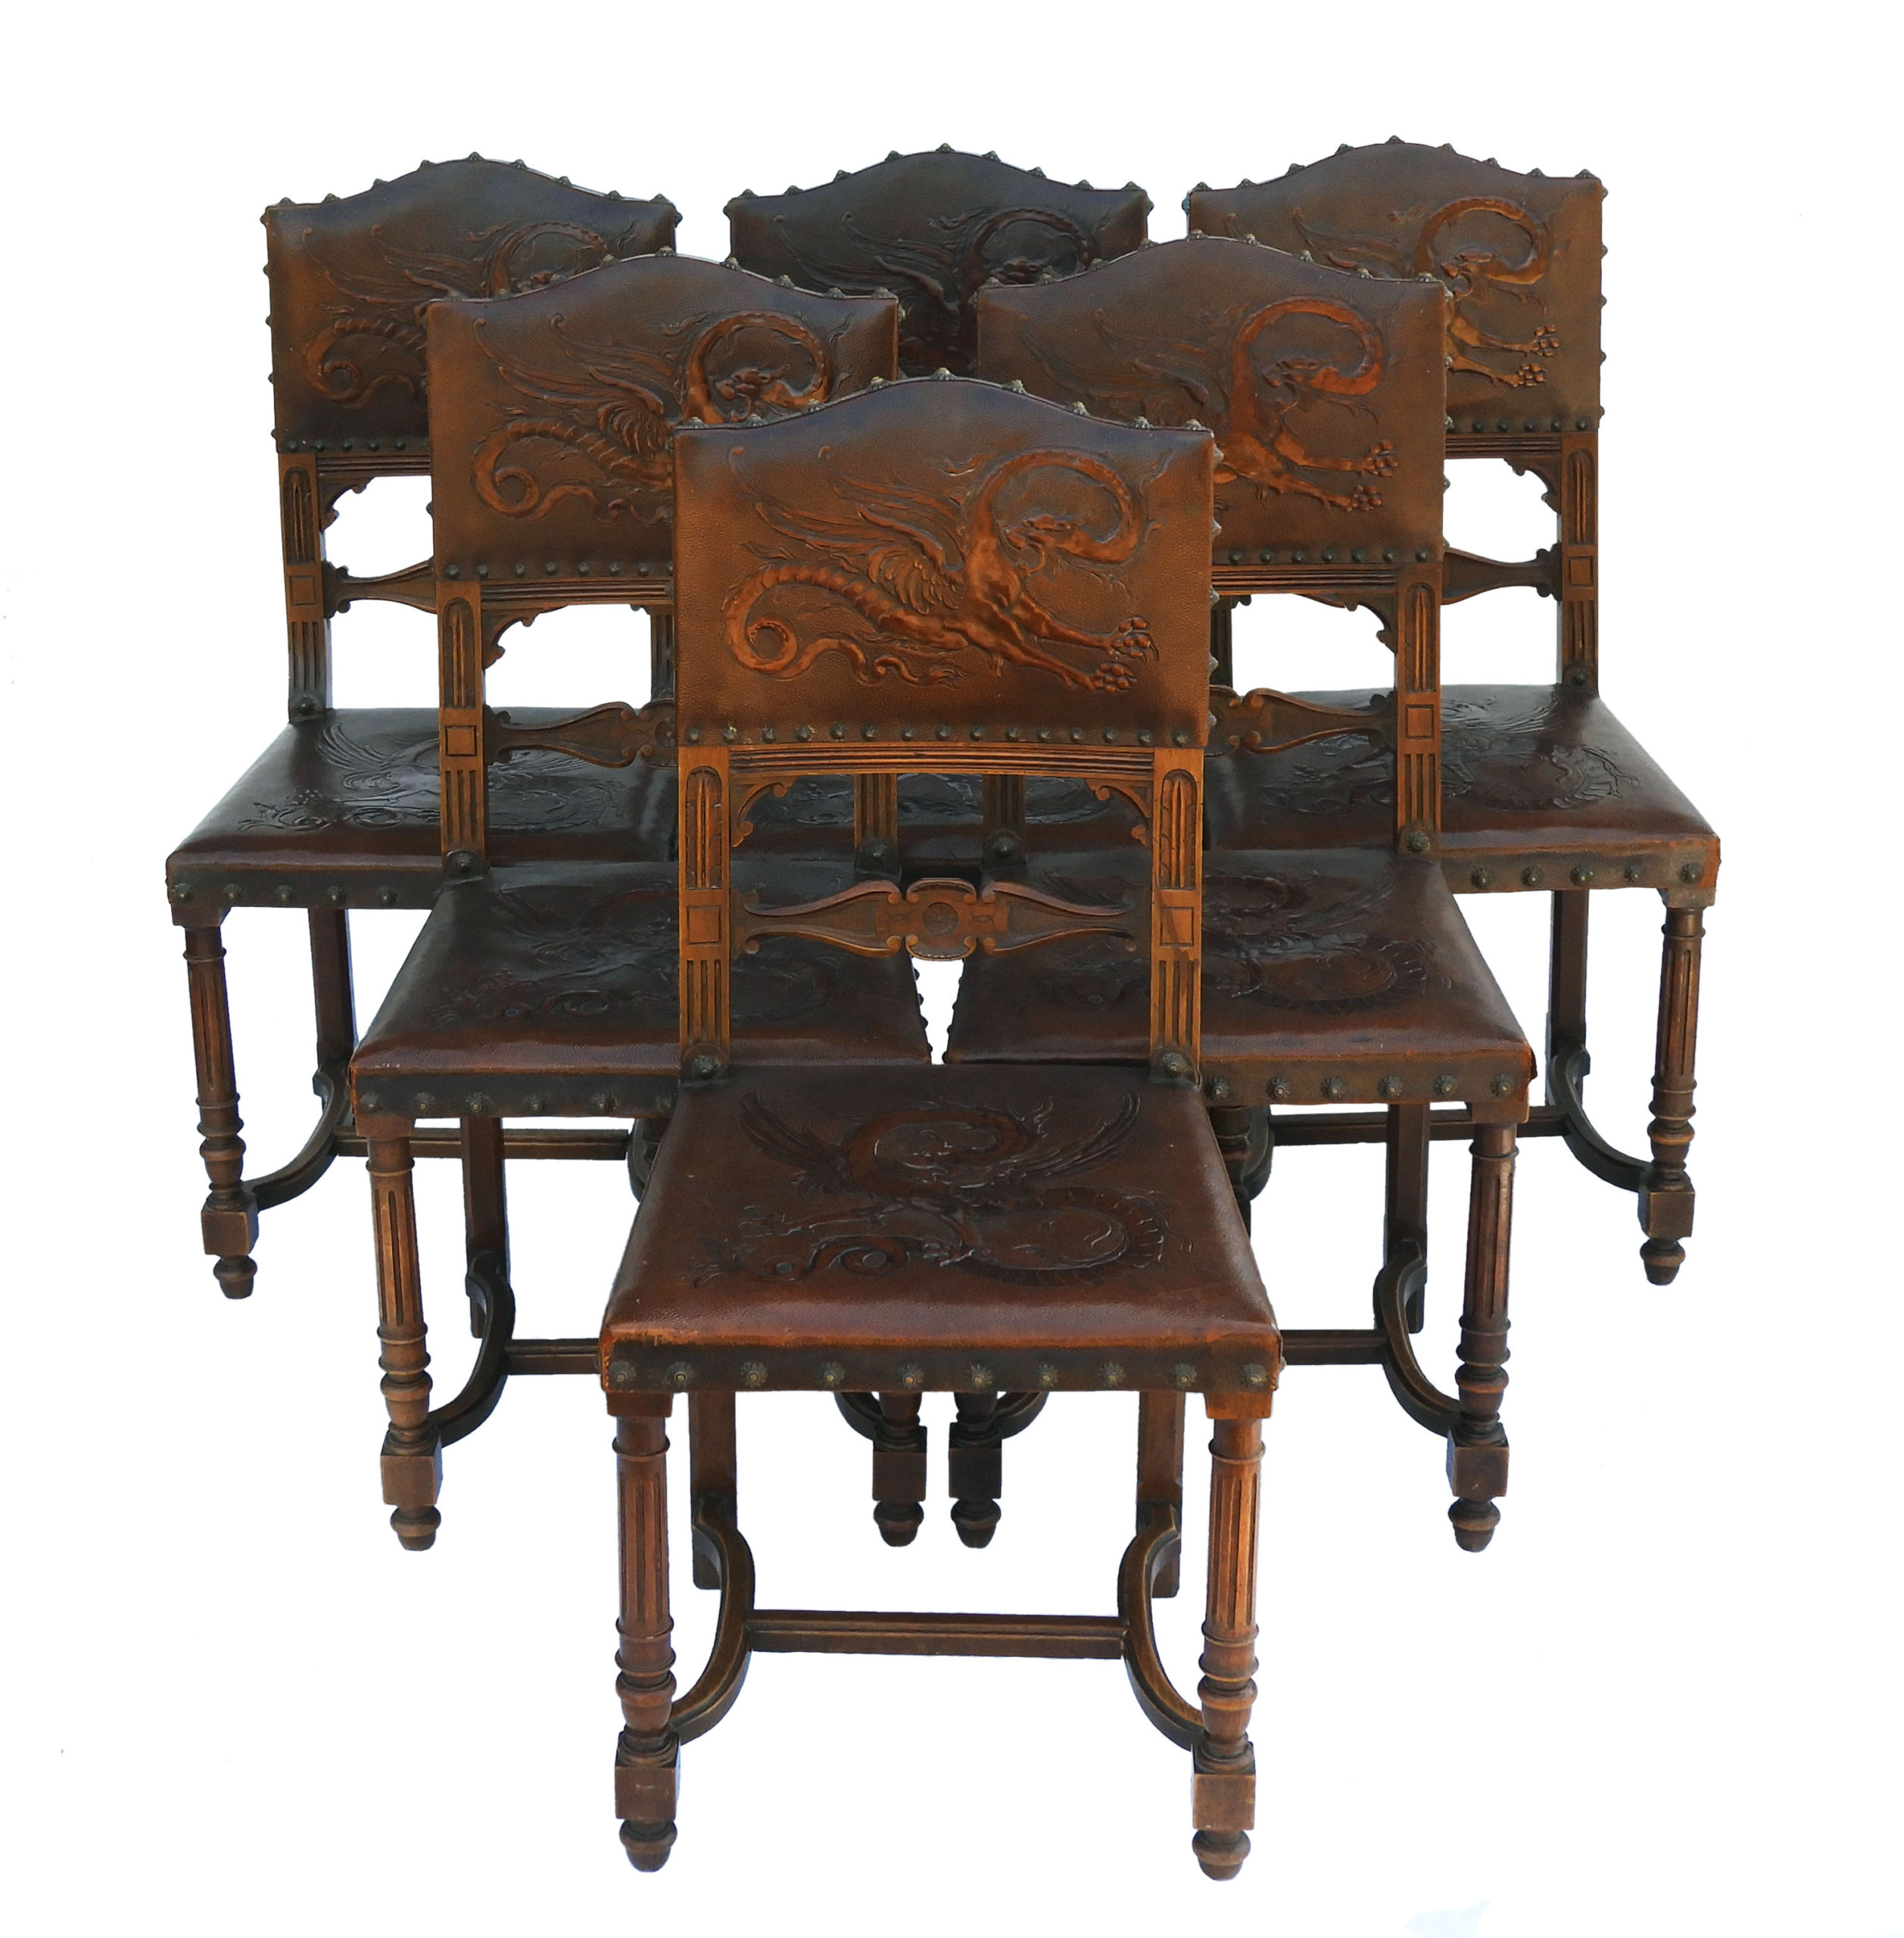 Antique Dining Chairs Gothic Revival, Spanish Style Leather Dining Chairs Uk